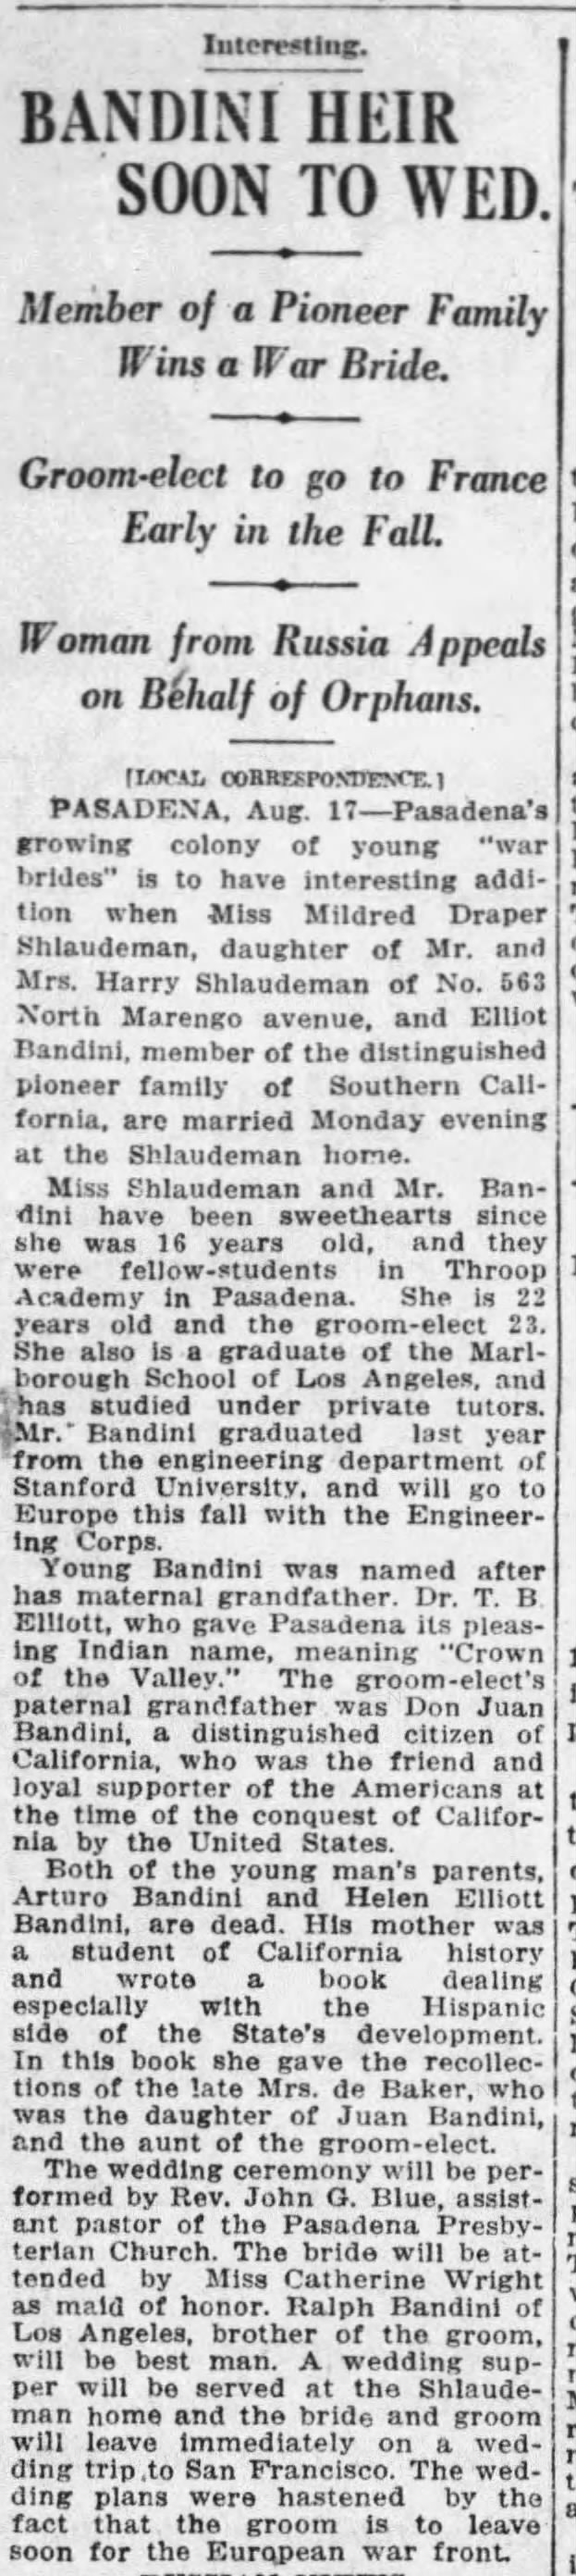 Bandini Heir Soon to Wed: Member of a Pioneer Family Wins a War Bride